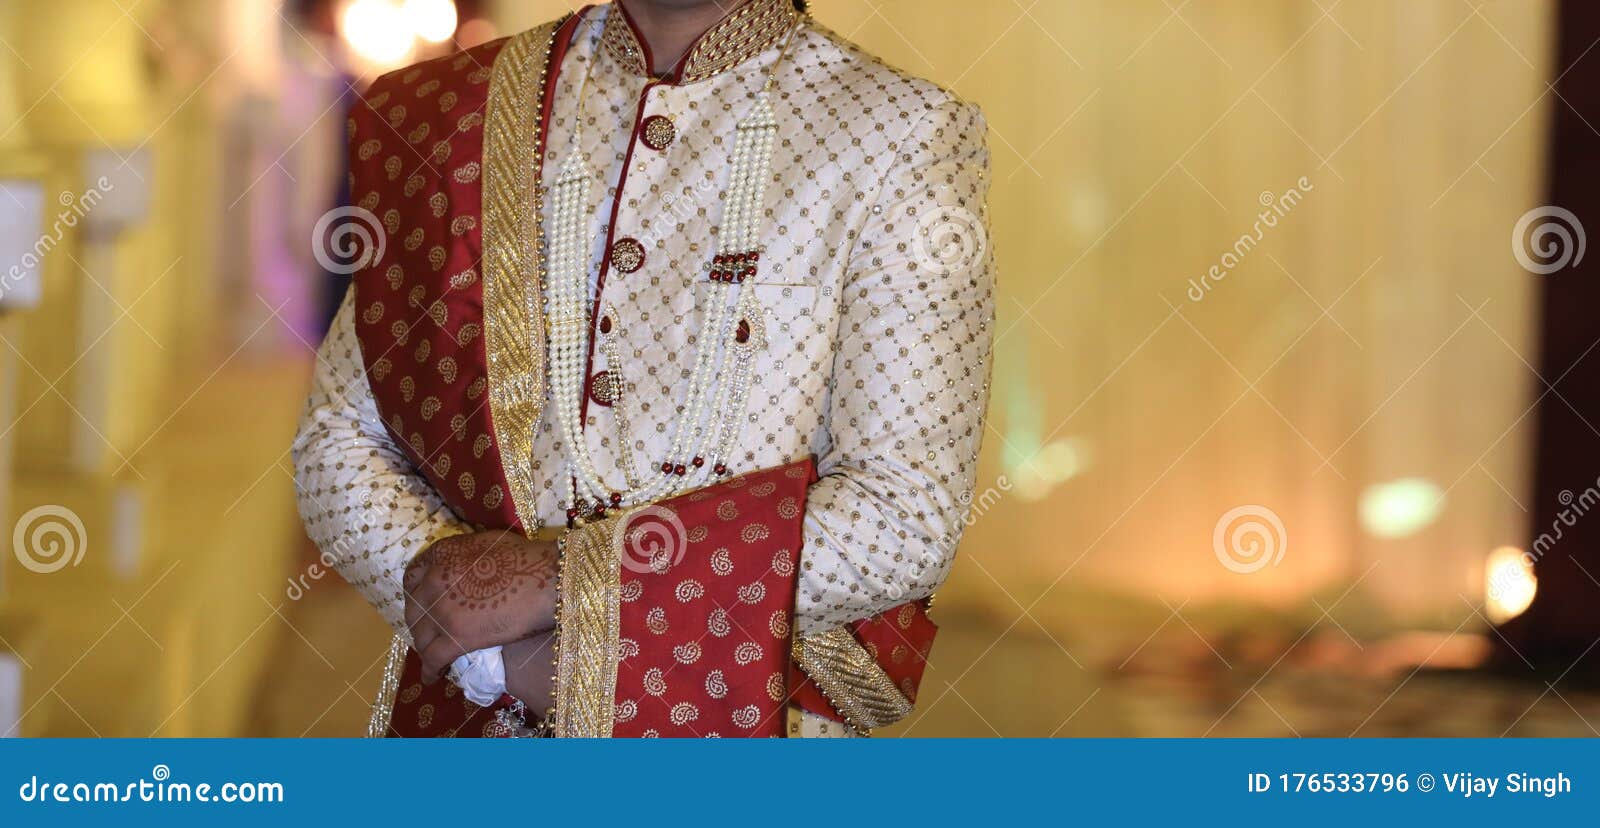 This Plus-Size Groom Is Sharing Major Goals In Sabyasachi Outfits! | Plus  size groom, Groom wedding dress, Indian wedding outfits